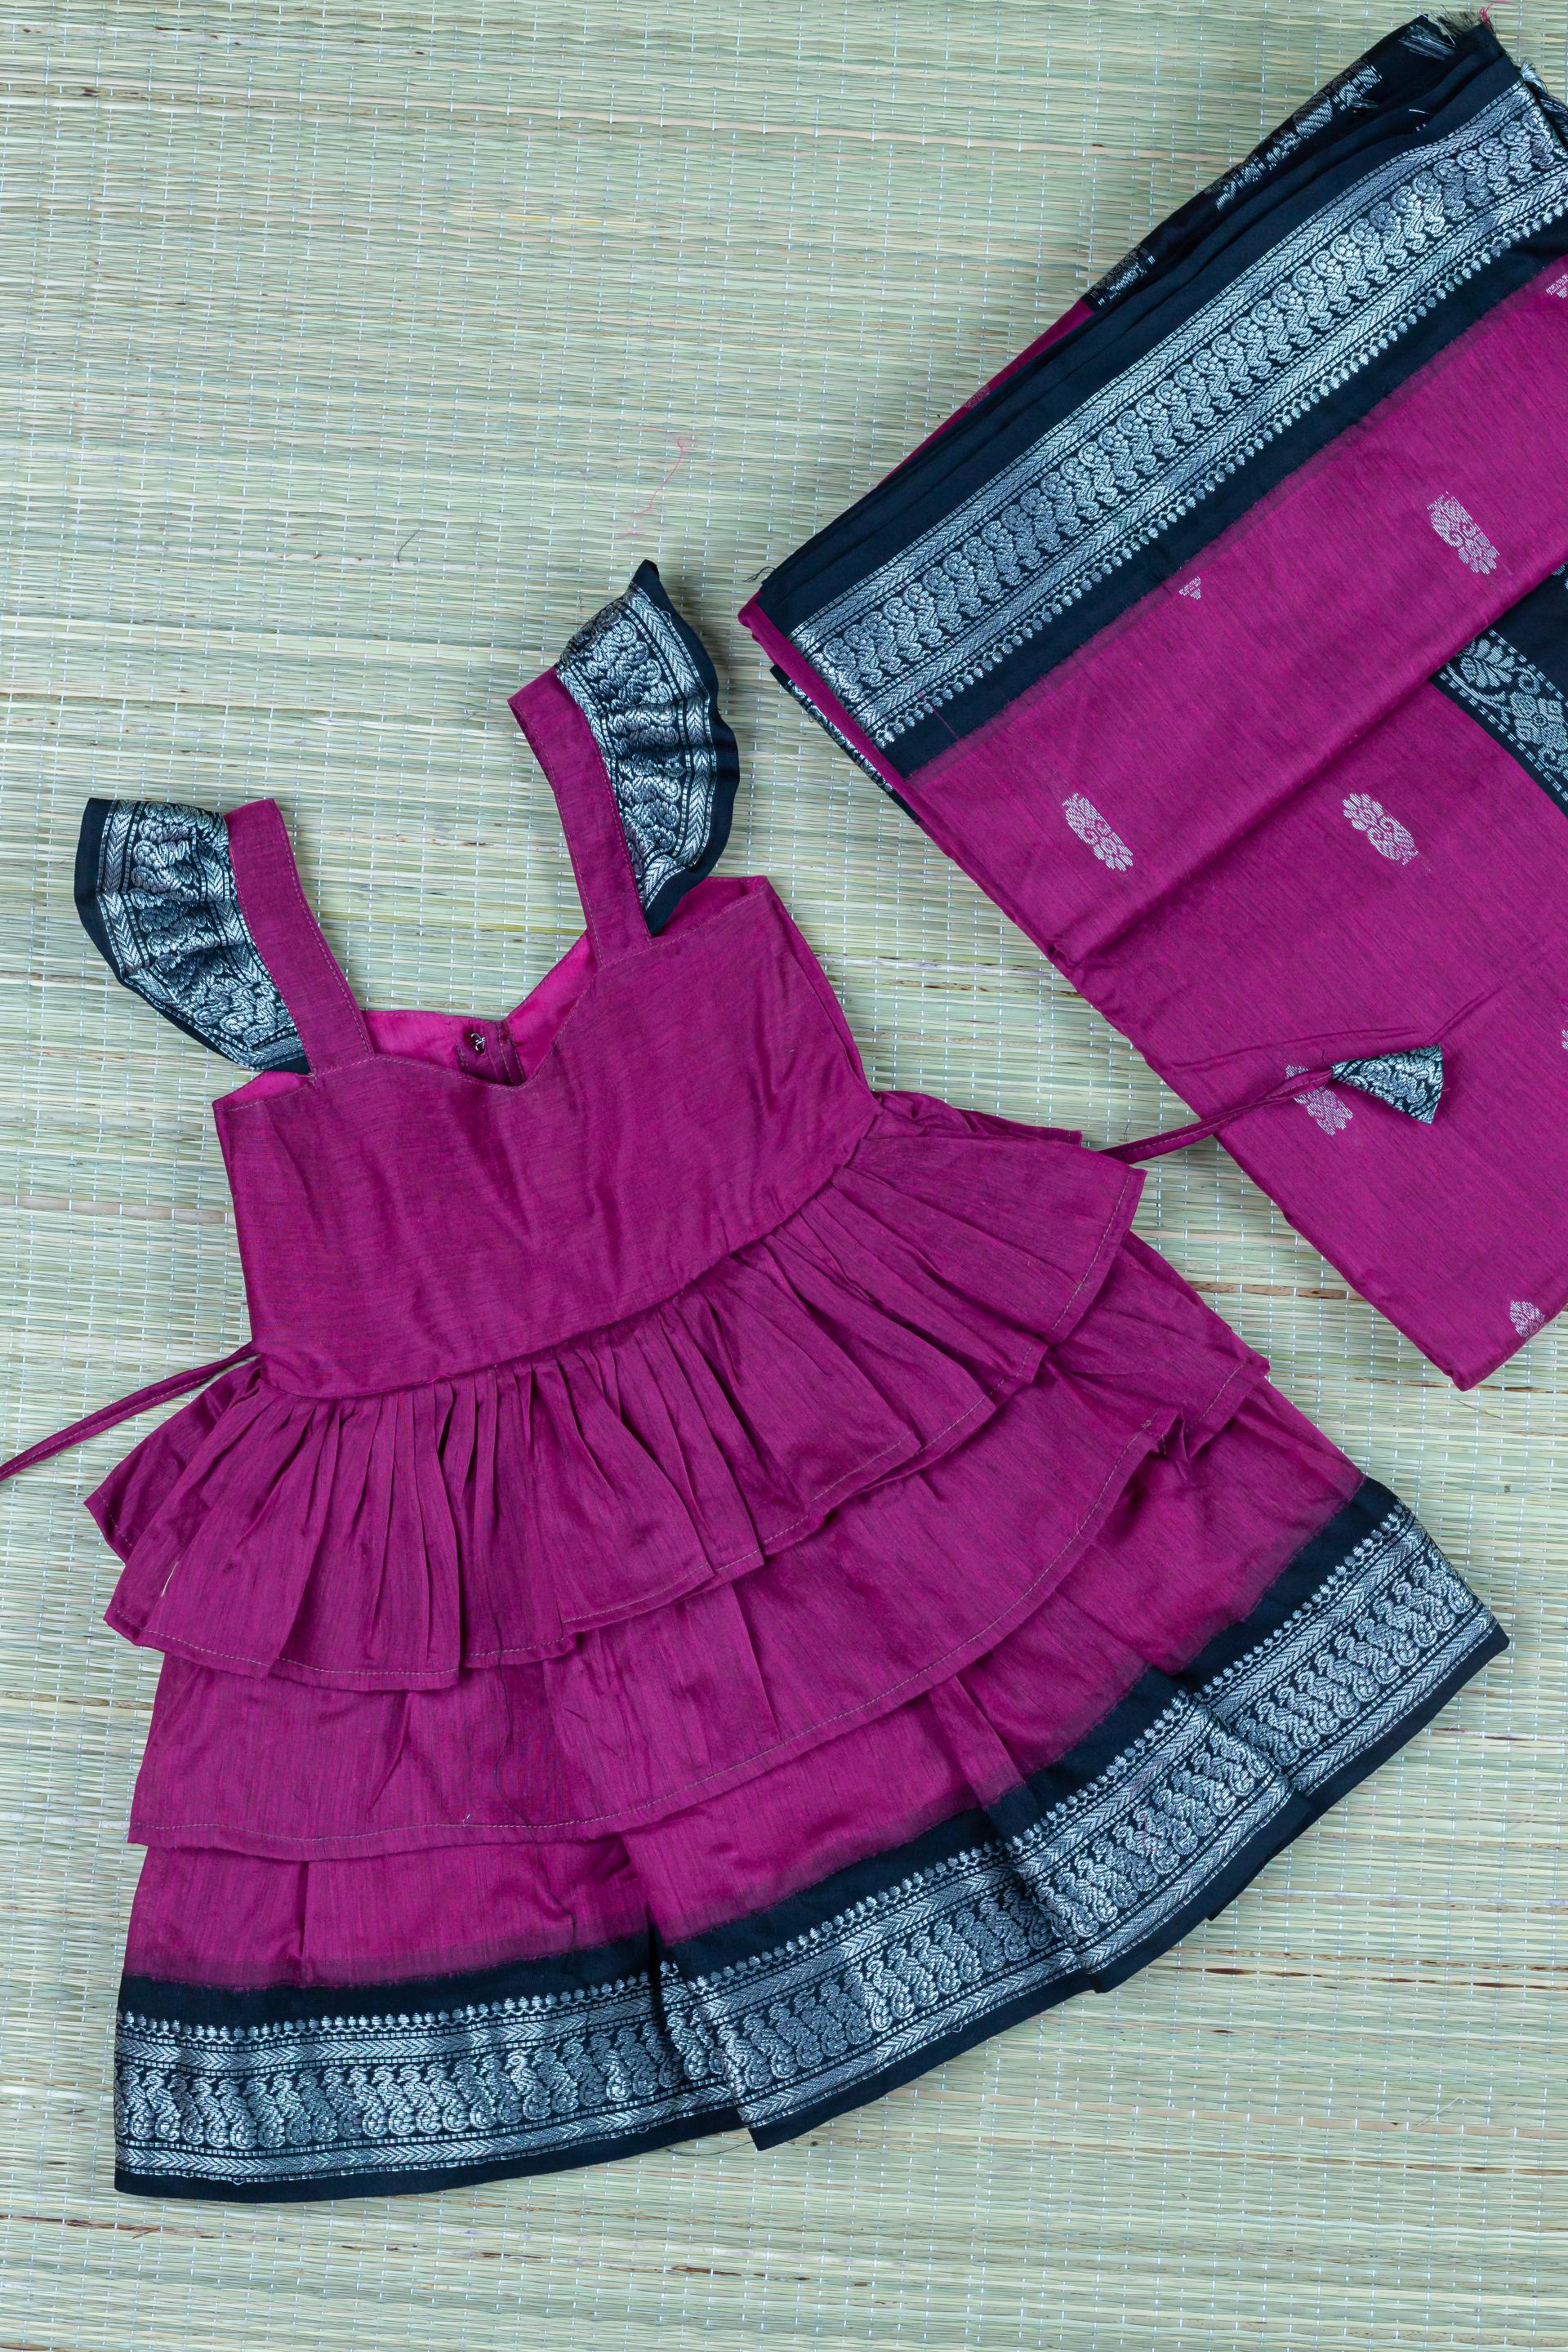 Transform Old Saree to Anarkali baby Dress For 10 Year Baby Girl - YouTube